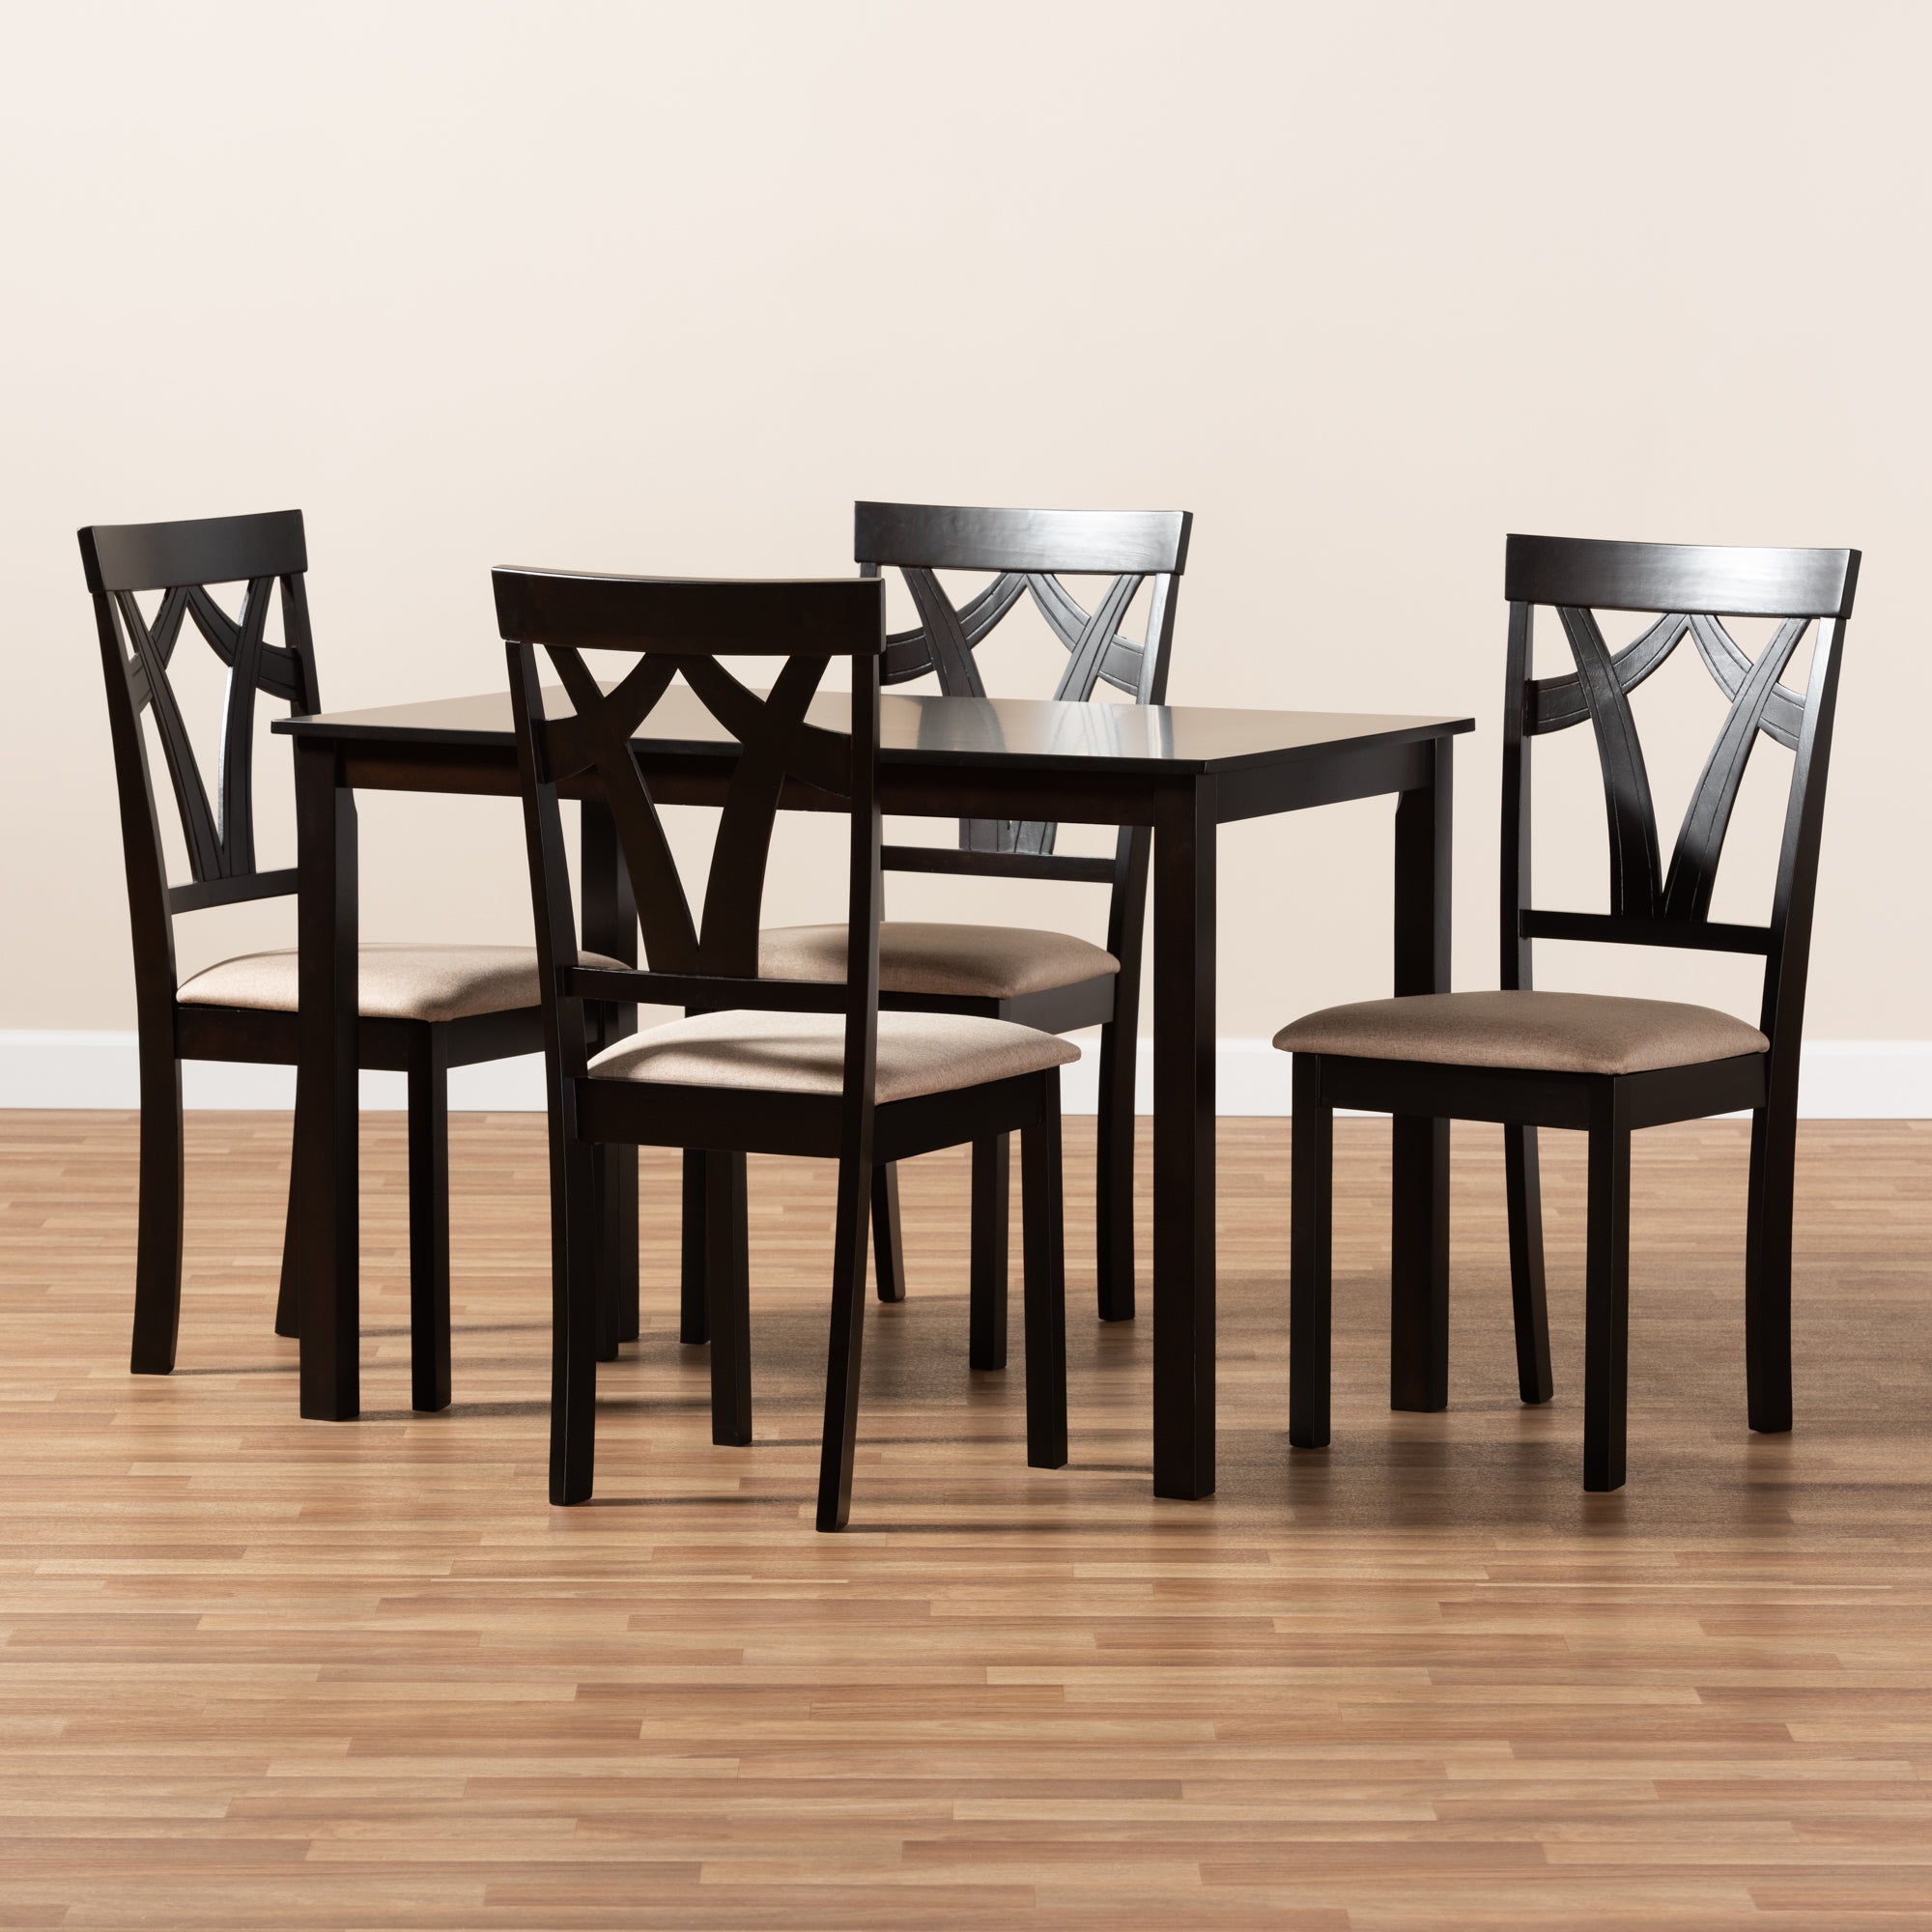 Sylvia Contemporary Dining Table: Dining Chairs 5-Piece-Dining Table: Dining Chairs-Baxton Studio - WI-Wall2Wall Furnishings